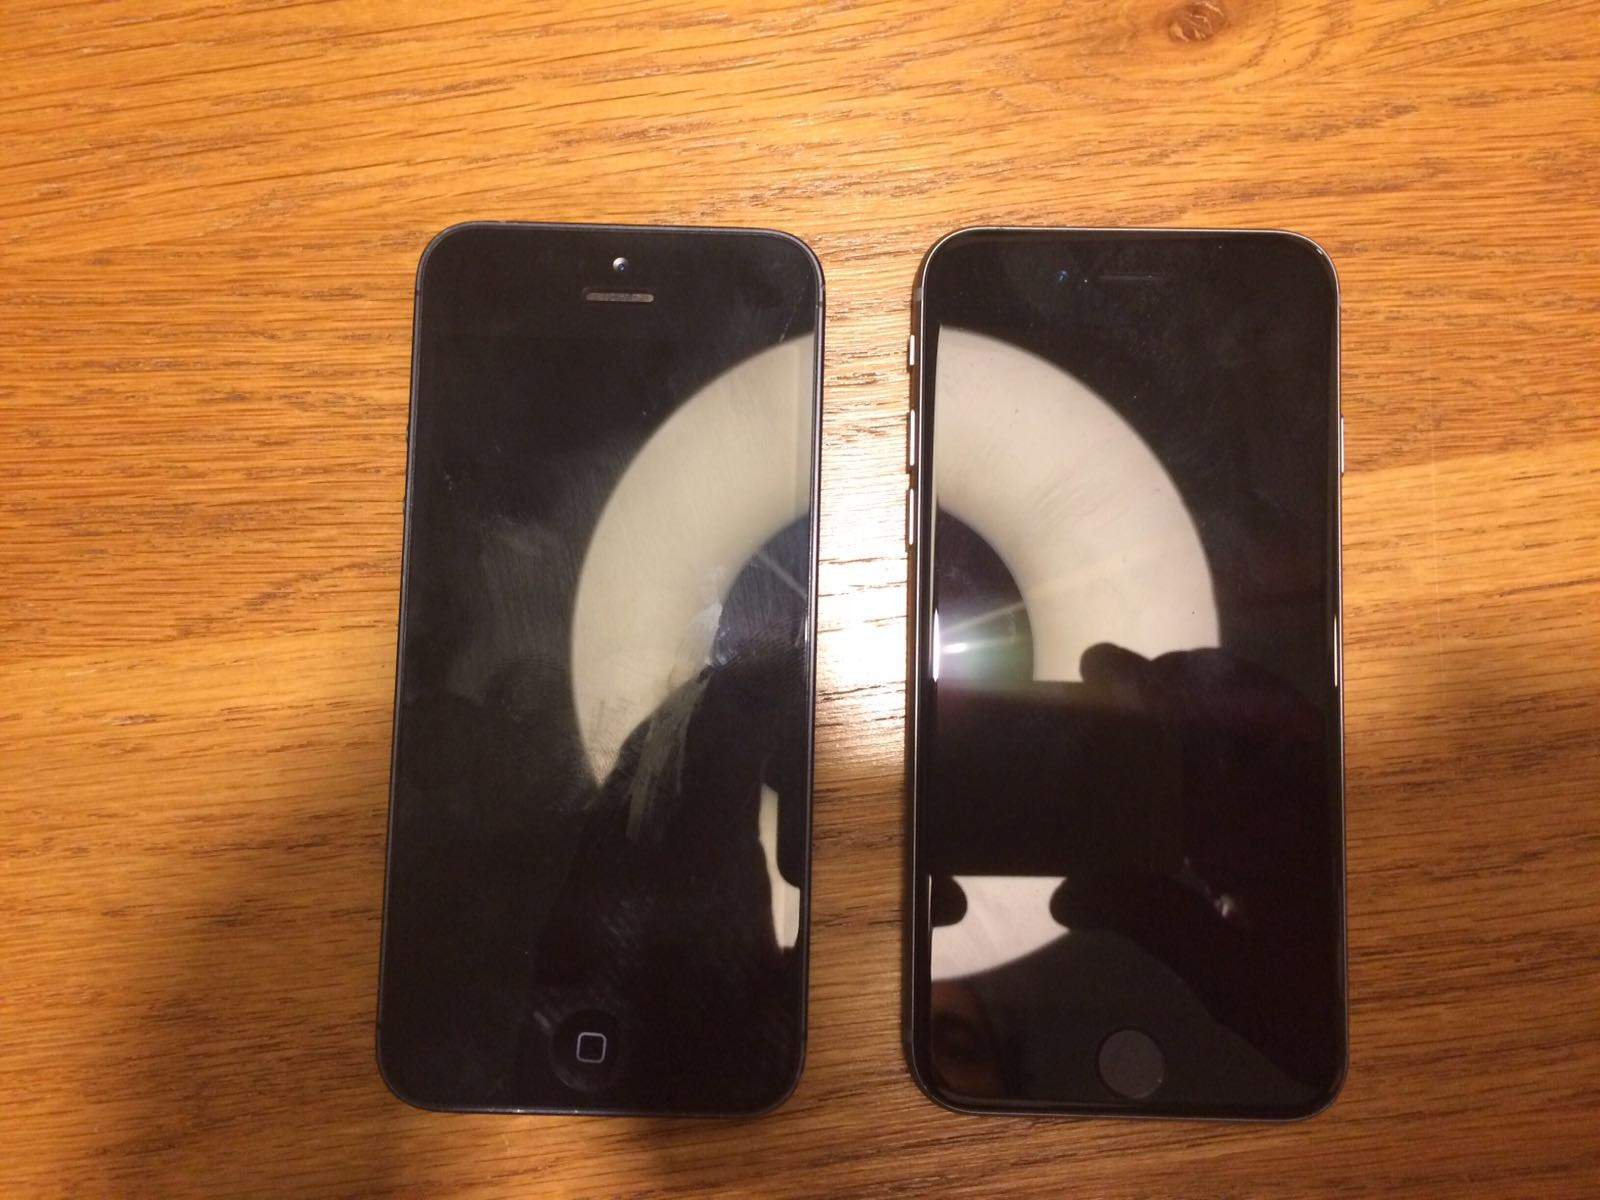 The iPhone 5 on the left, the iPhone 5se on the right.